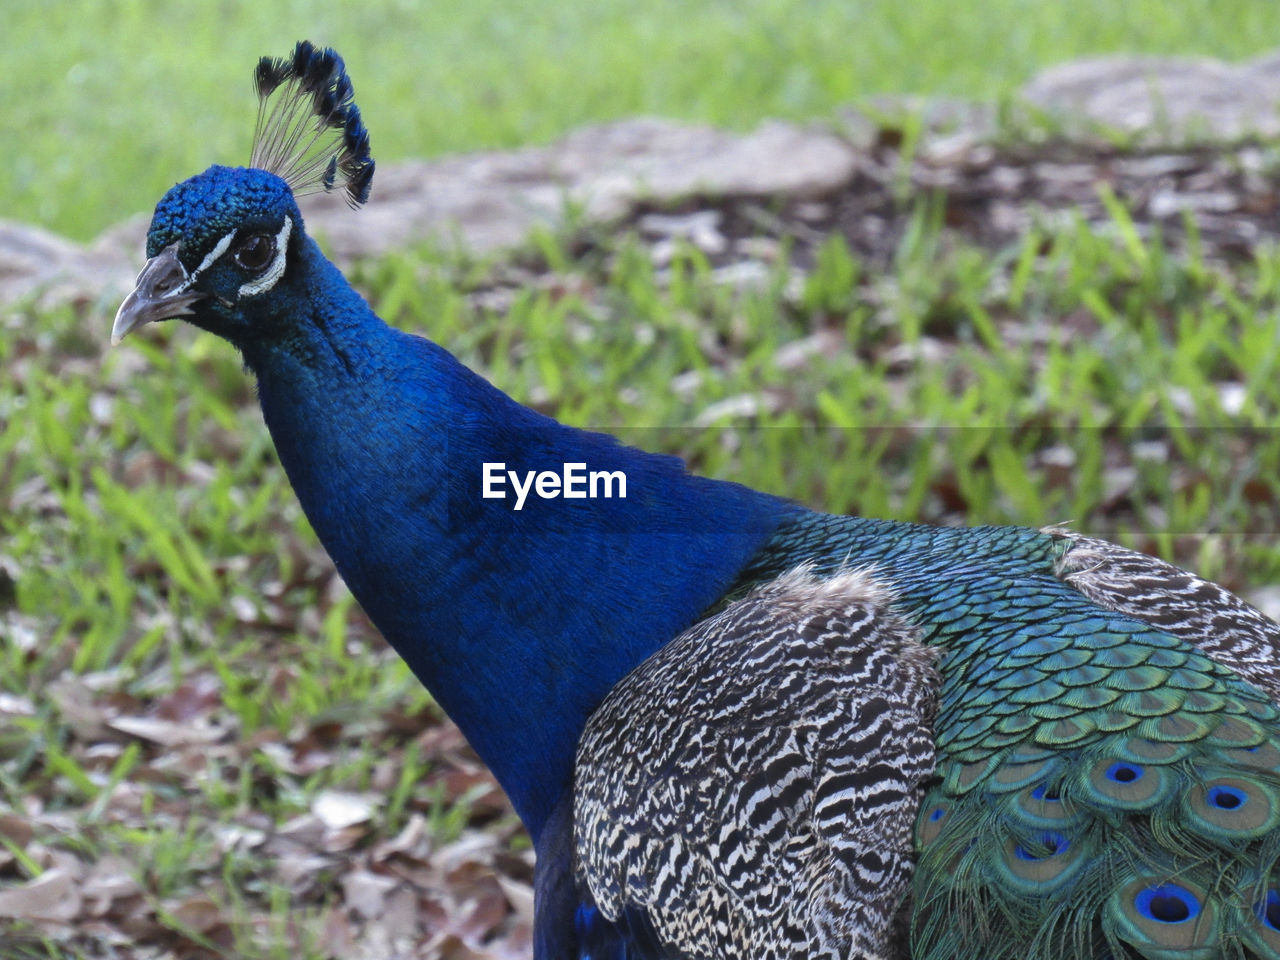 CLOSE-UP OF PEACOCK IN FIELD